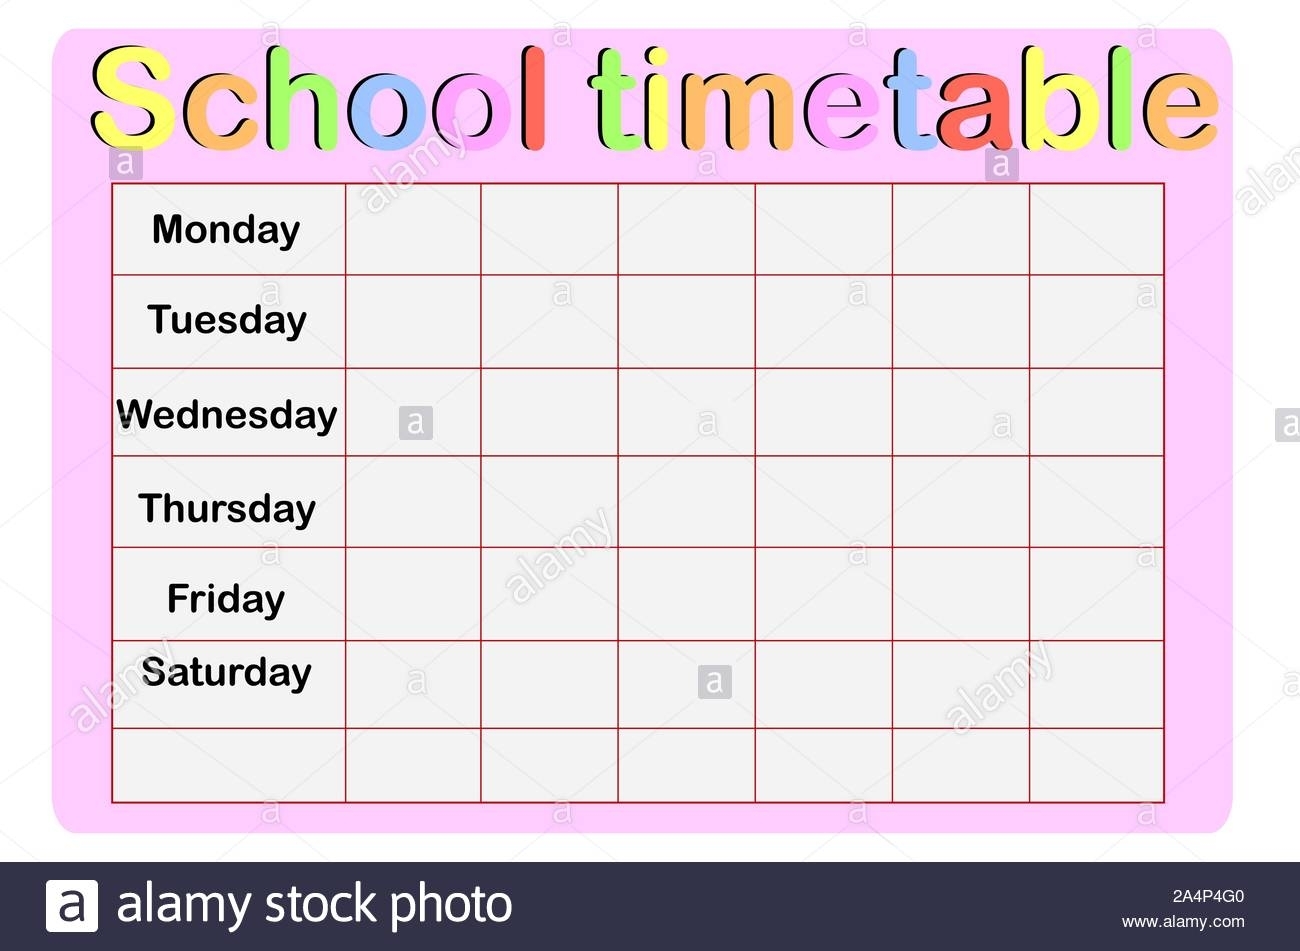 Template School Timetable For Students Or Pupils With Days